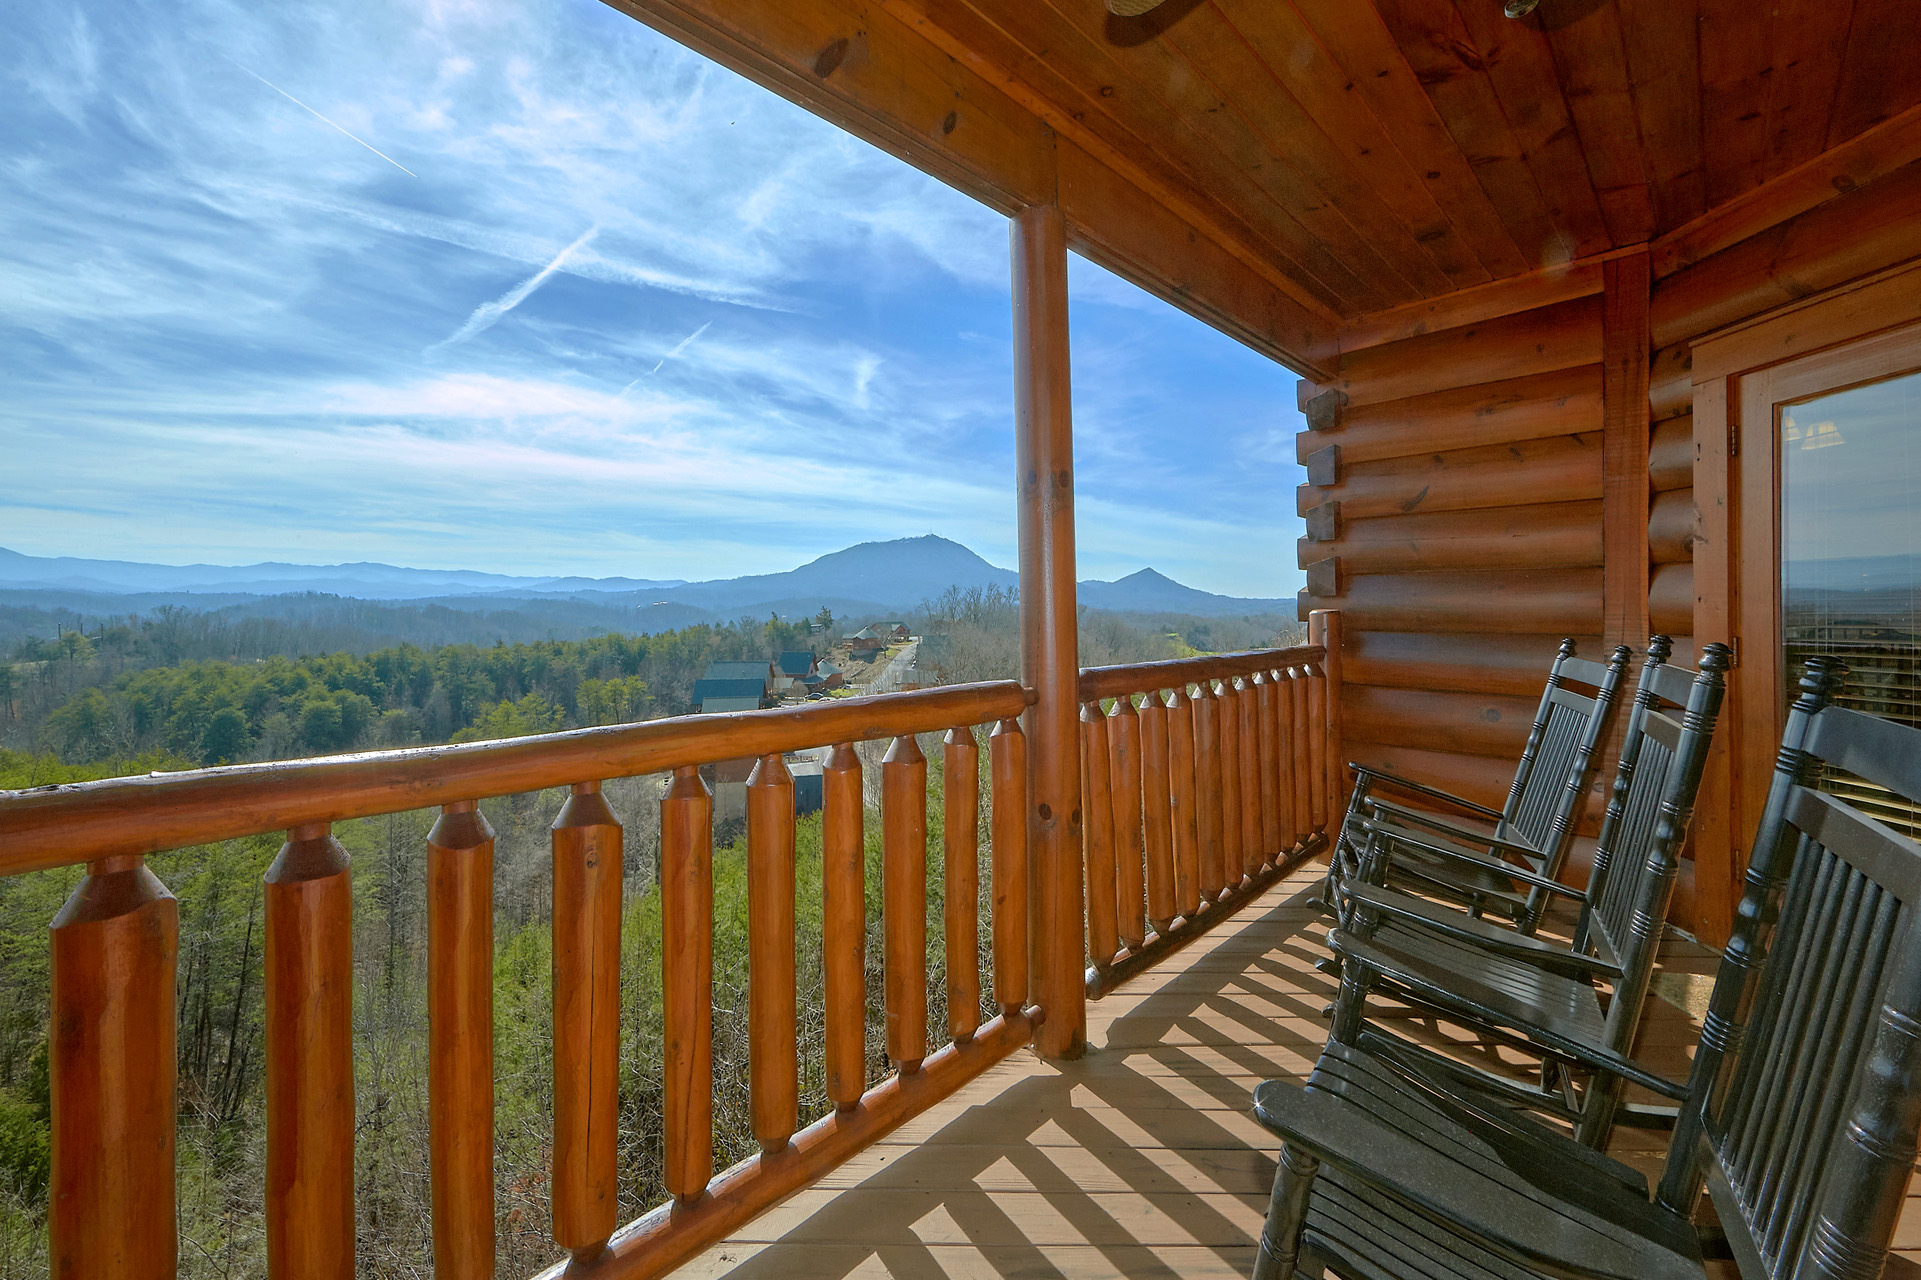 vacation rentals united states tennessee images websitelogos images fav_touch_icons vacation rentals united states tennessee sevierville